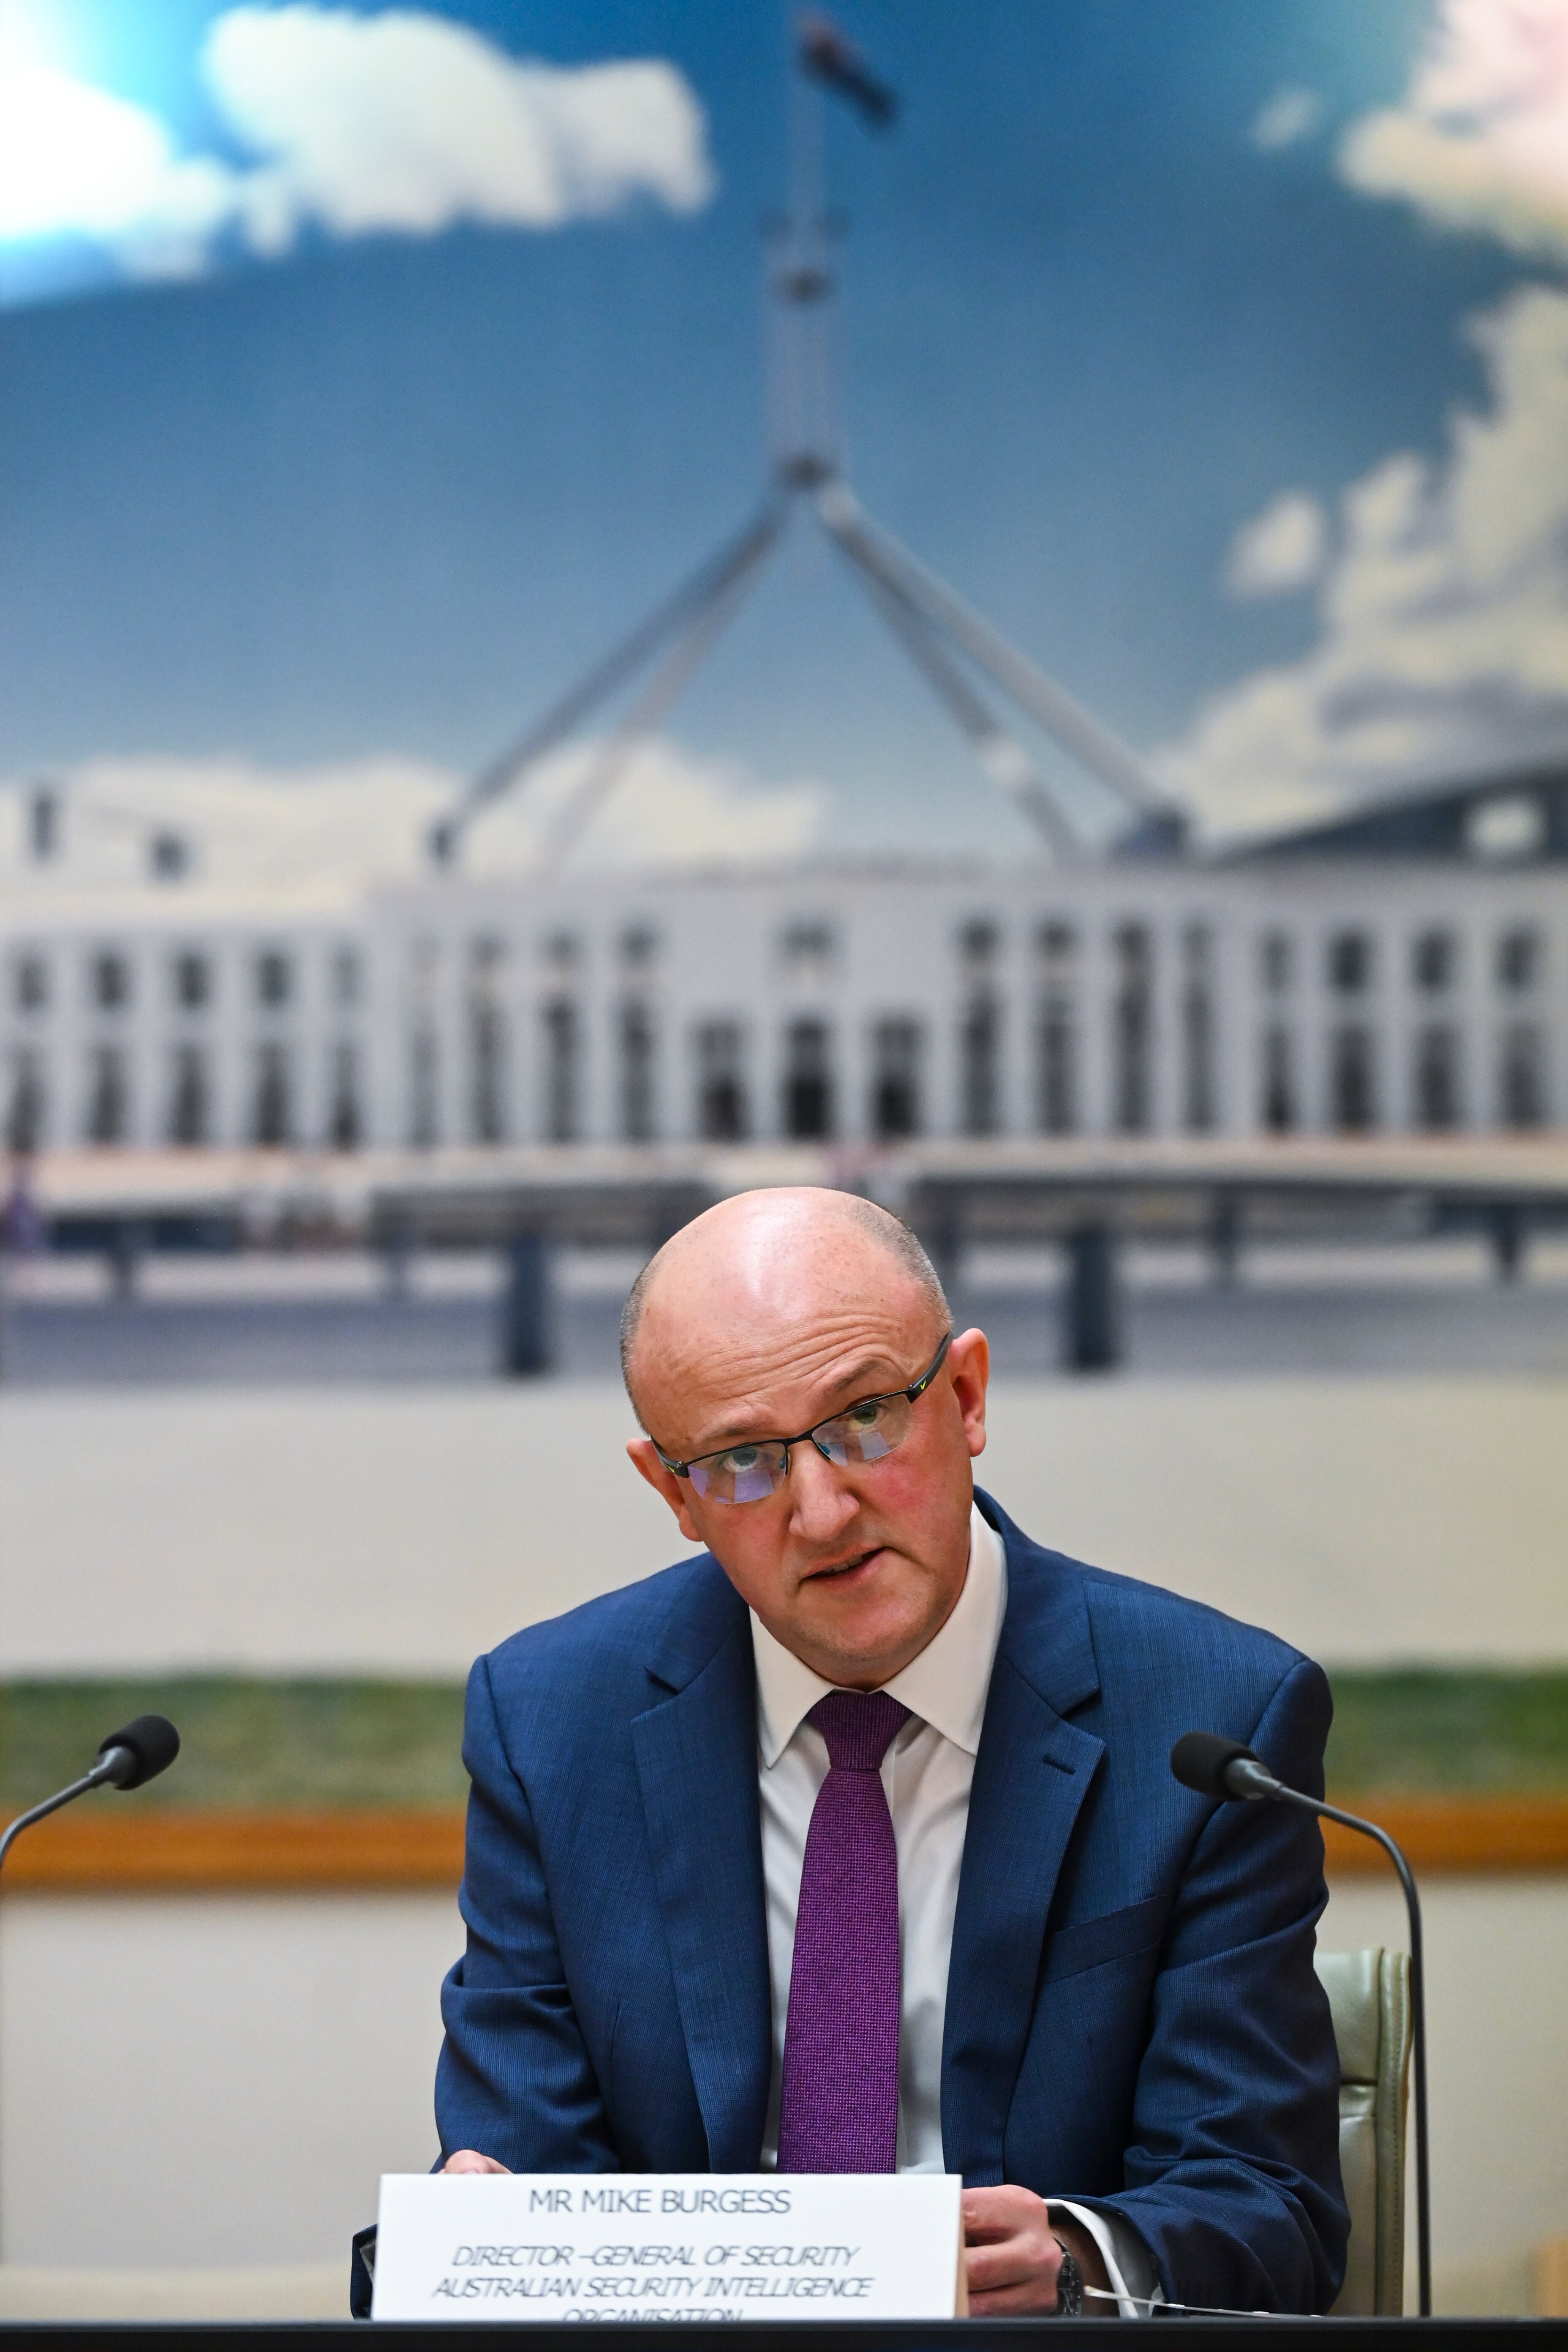 Chief of Australian Security Intelligence Organisation (ASIO) Mike Burgess speaks during a Parliamentary Joint Committee on Intelligence and Security hearing at Parliament House in Canberra, August 7, 2020.